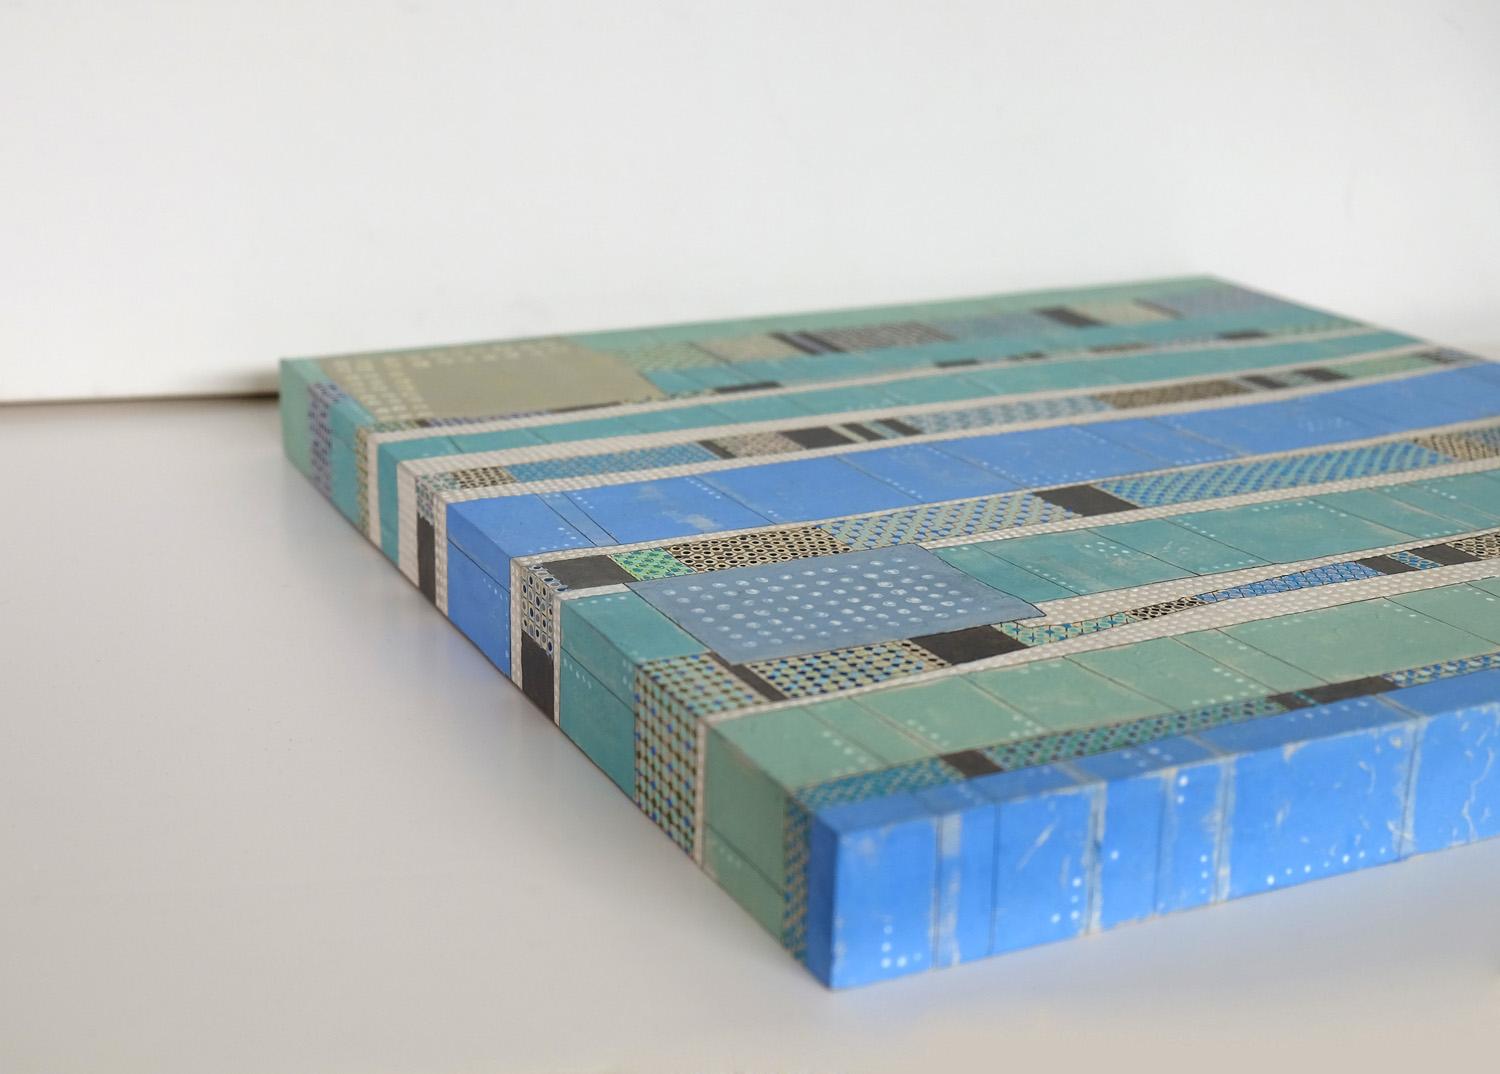 <p>Artist Comments<br>Vertical geometric rows with varying sections in subdued shades of teal, beige and blue. 